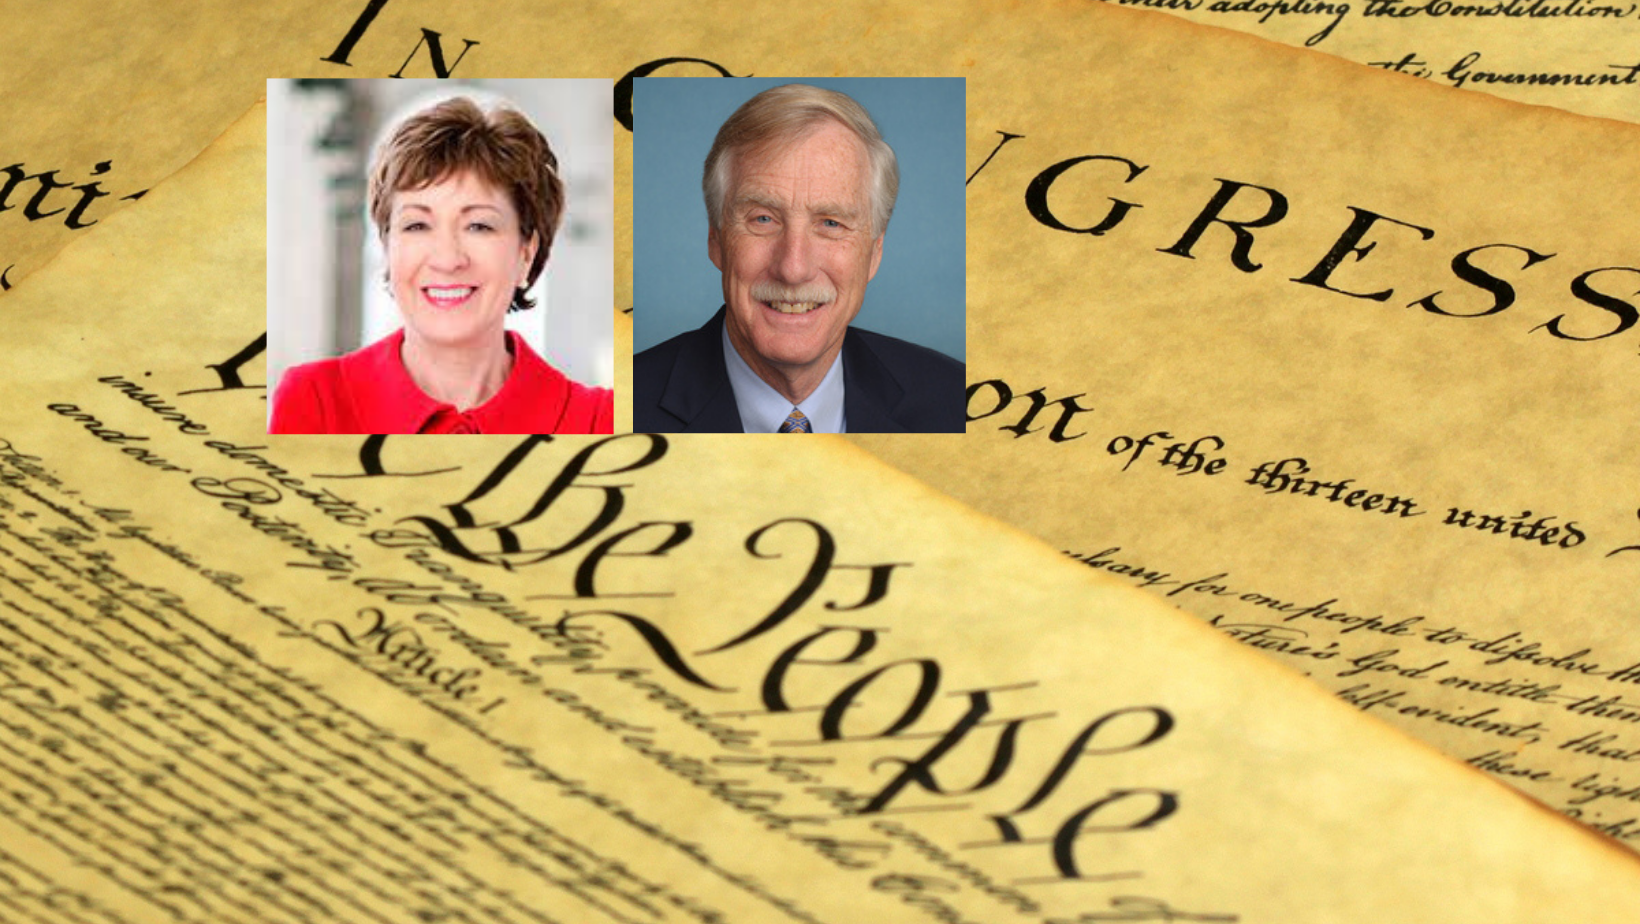 The Importance of the First Amendment: Remarks by U.S. Senators from Maine